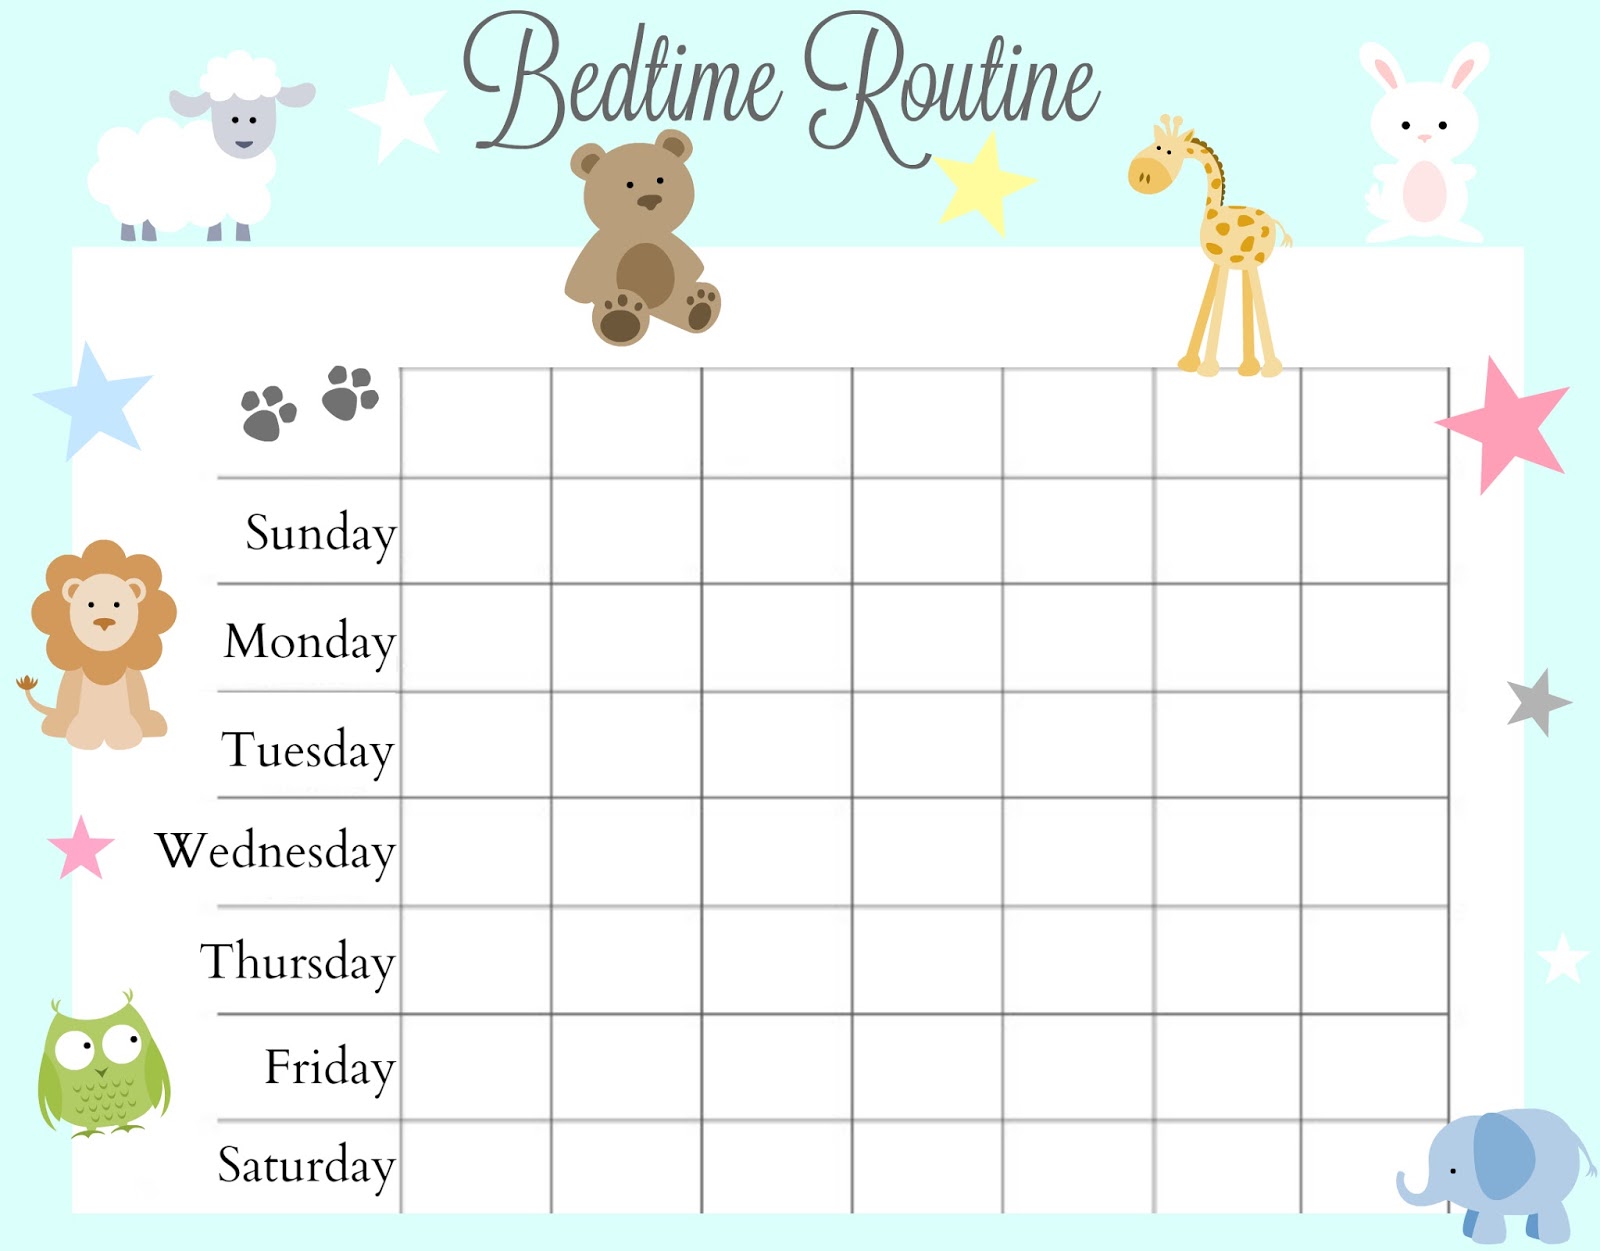 guide-for-effective-bedtime-routine-using-elo-pillow-free-bedtime